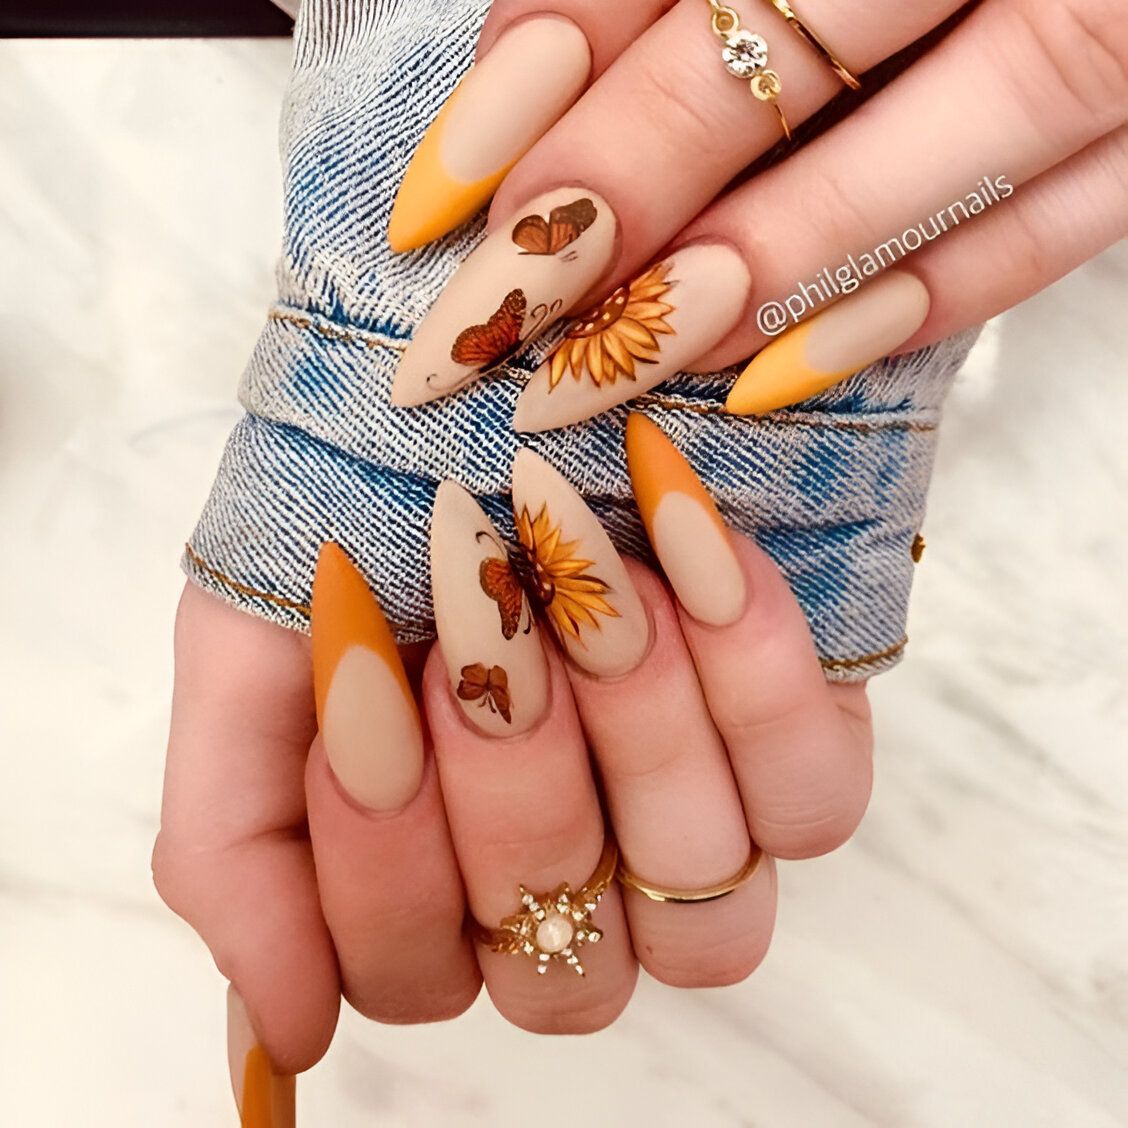 Nail Design With Butterflies And Flowers